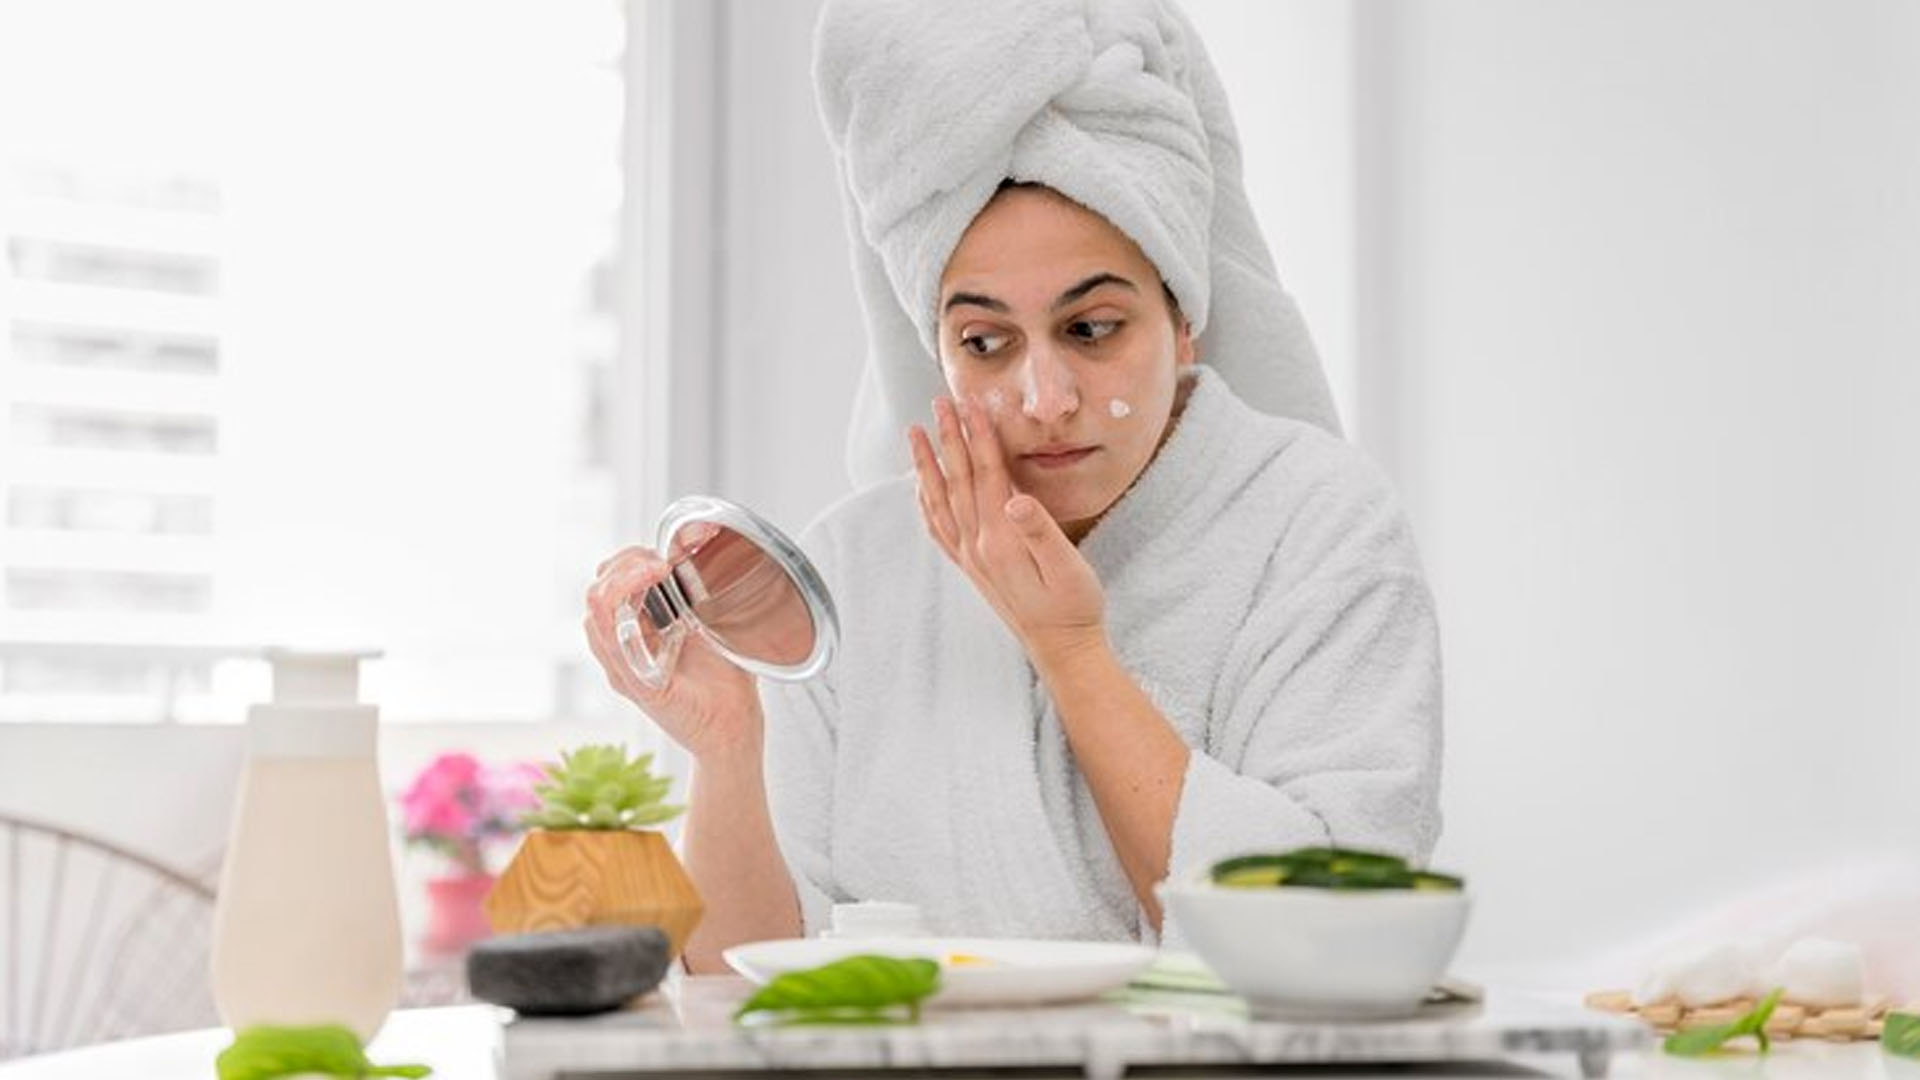 What are the Home Remedies for Clean Face?